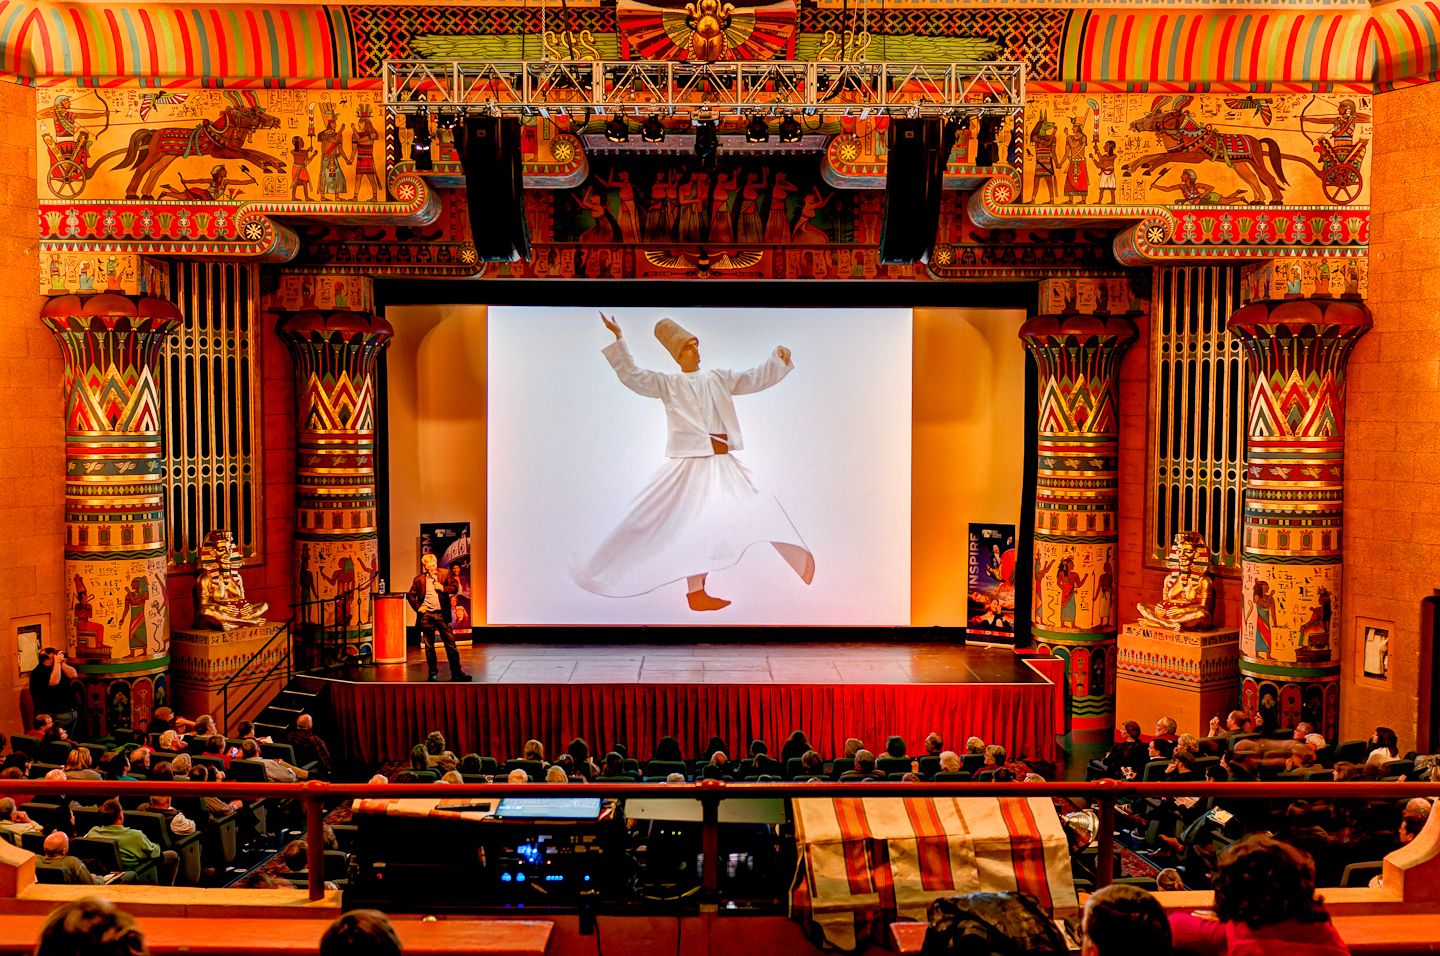 The Egyptian Theatre